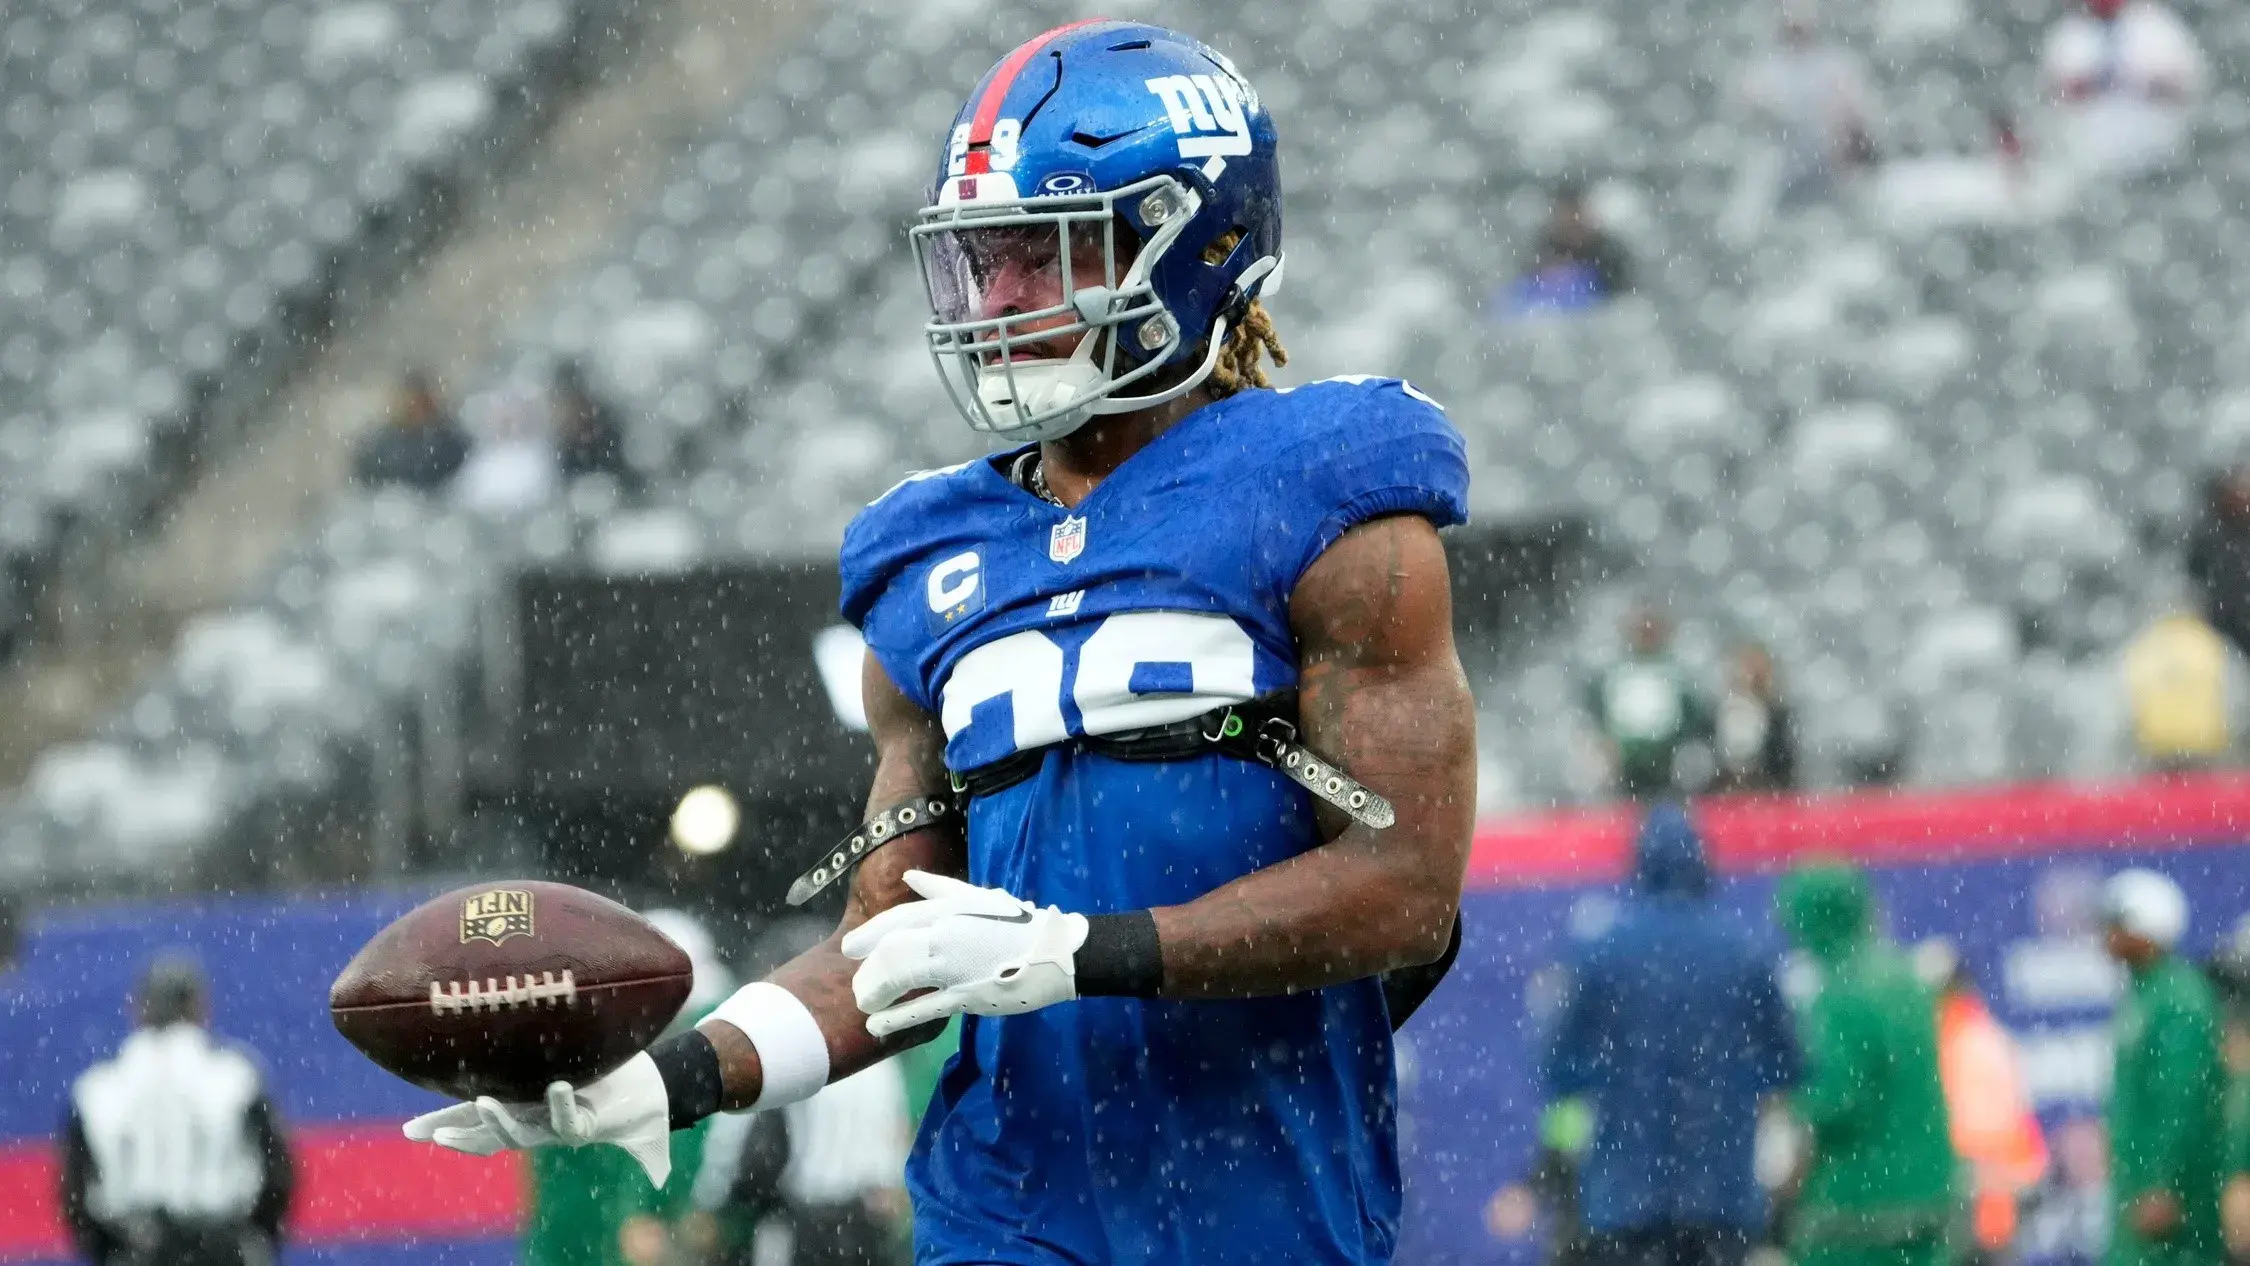 October 29, 2023; East Rutherford, NJ, USA; New York Giants safety Xavier McKinney (29) is shown with the ball during a pregame warm-up. / Kevin R. Wexler - The Record / USA TODAY NETWORK